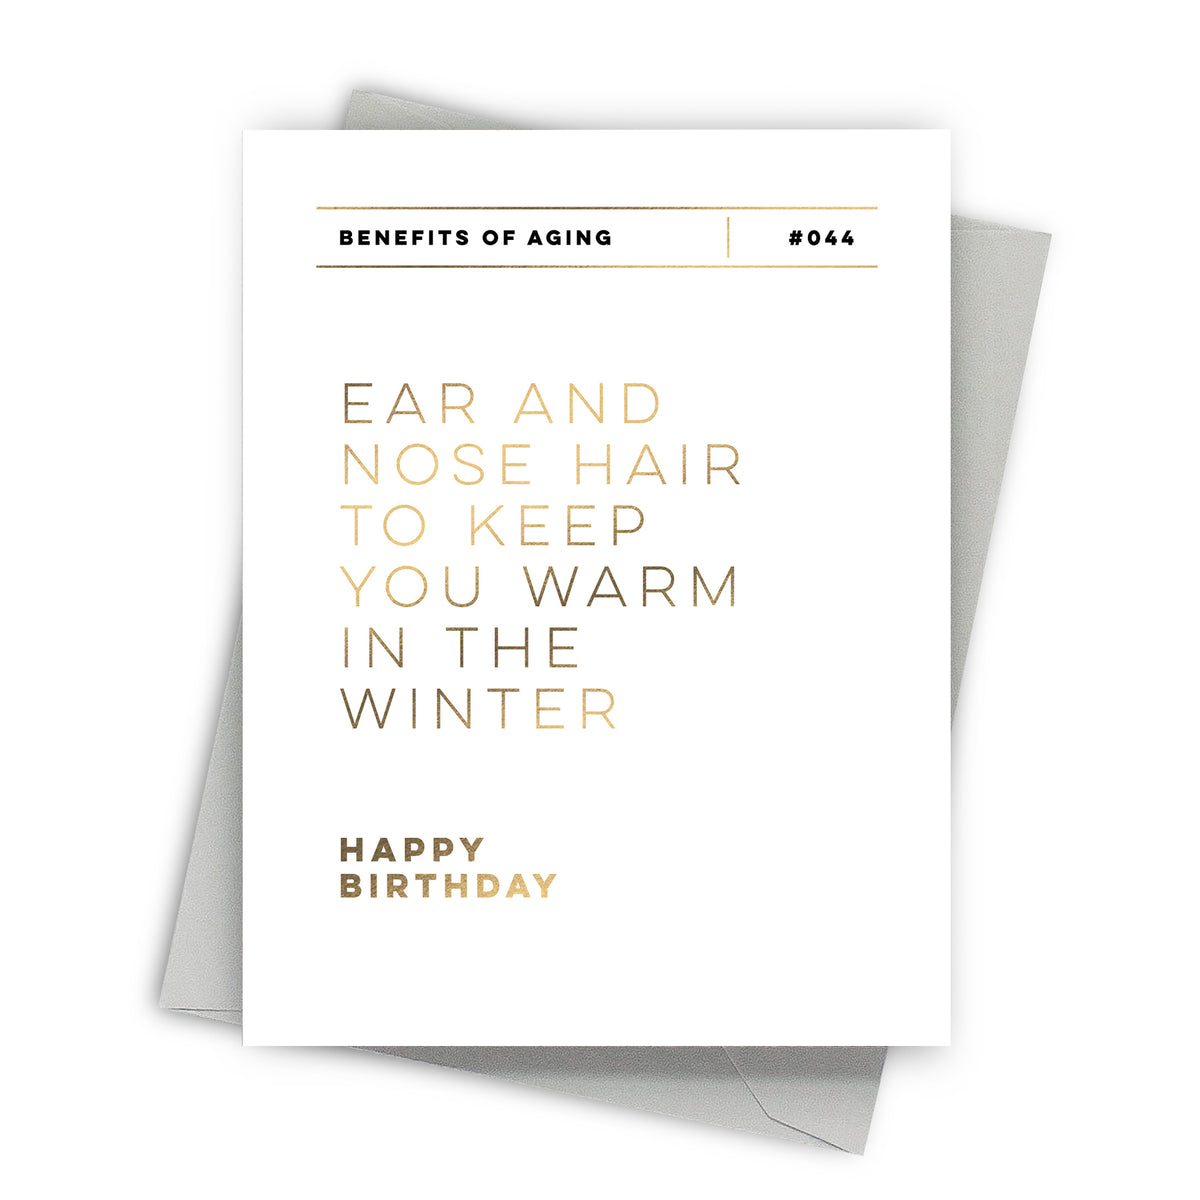 Extra Hair Birthday Card by Fine Moments